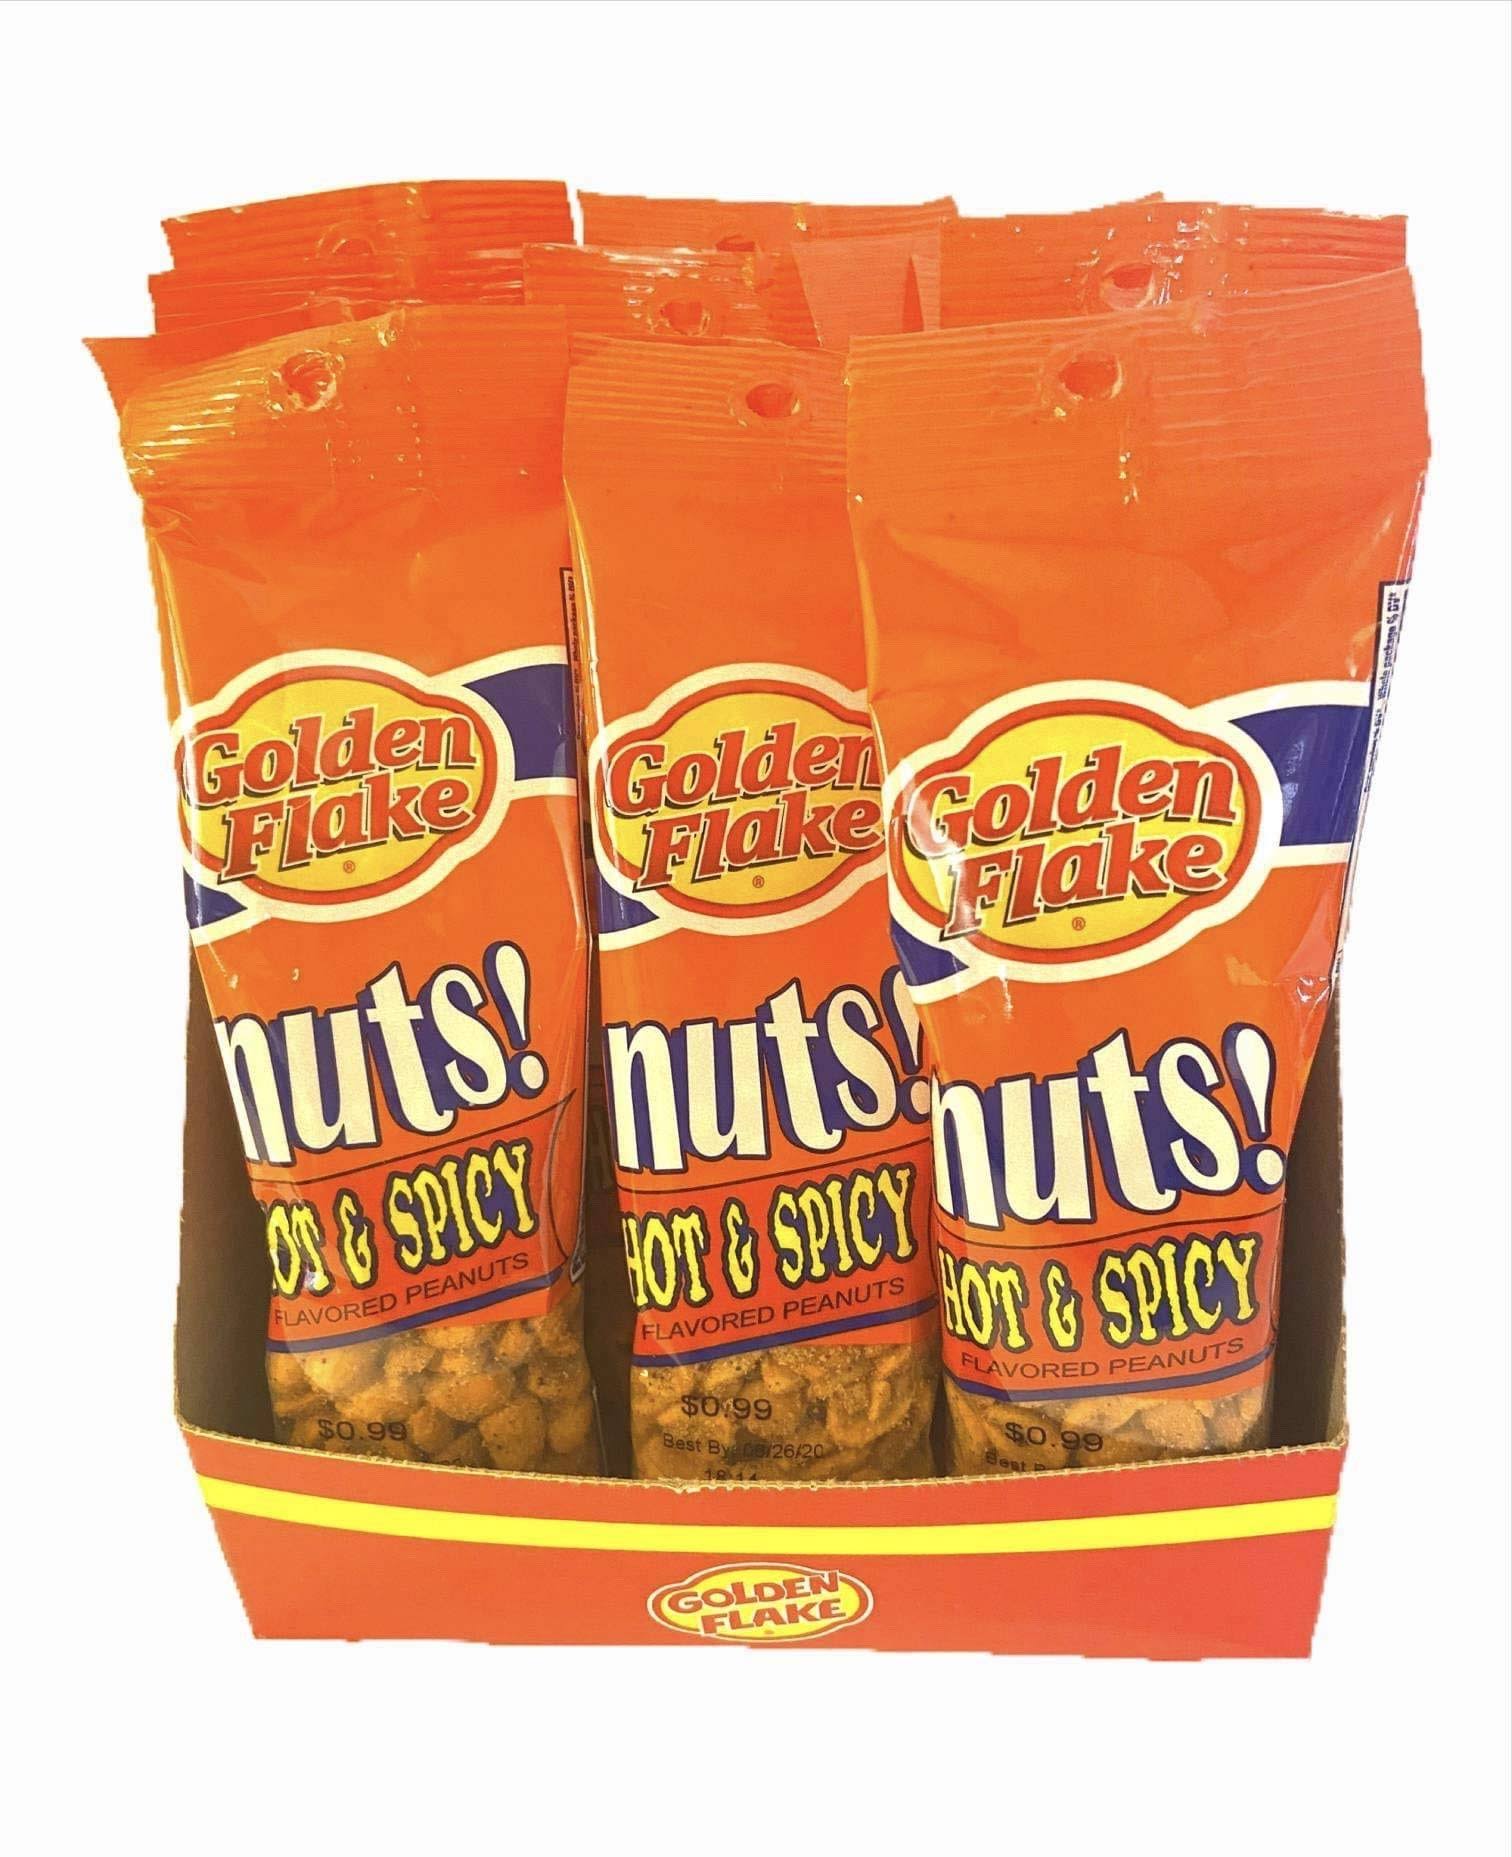 Golden Flake, Peanuts, Hot & Spicy